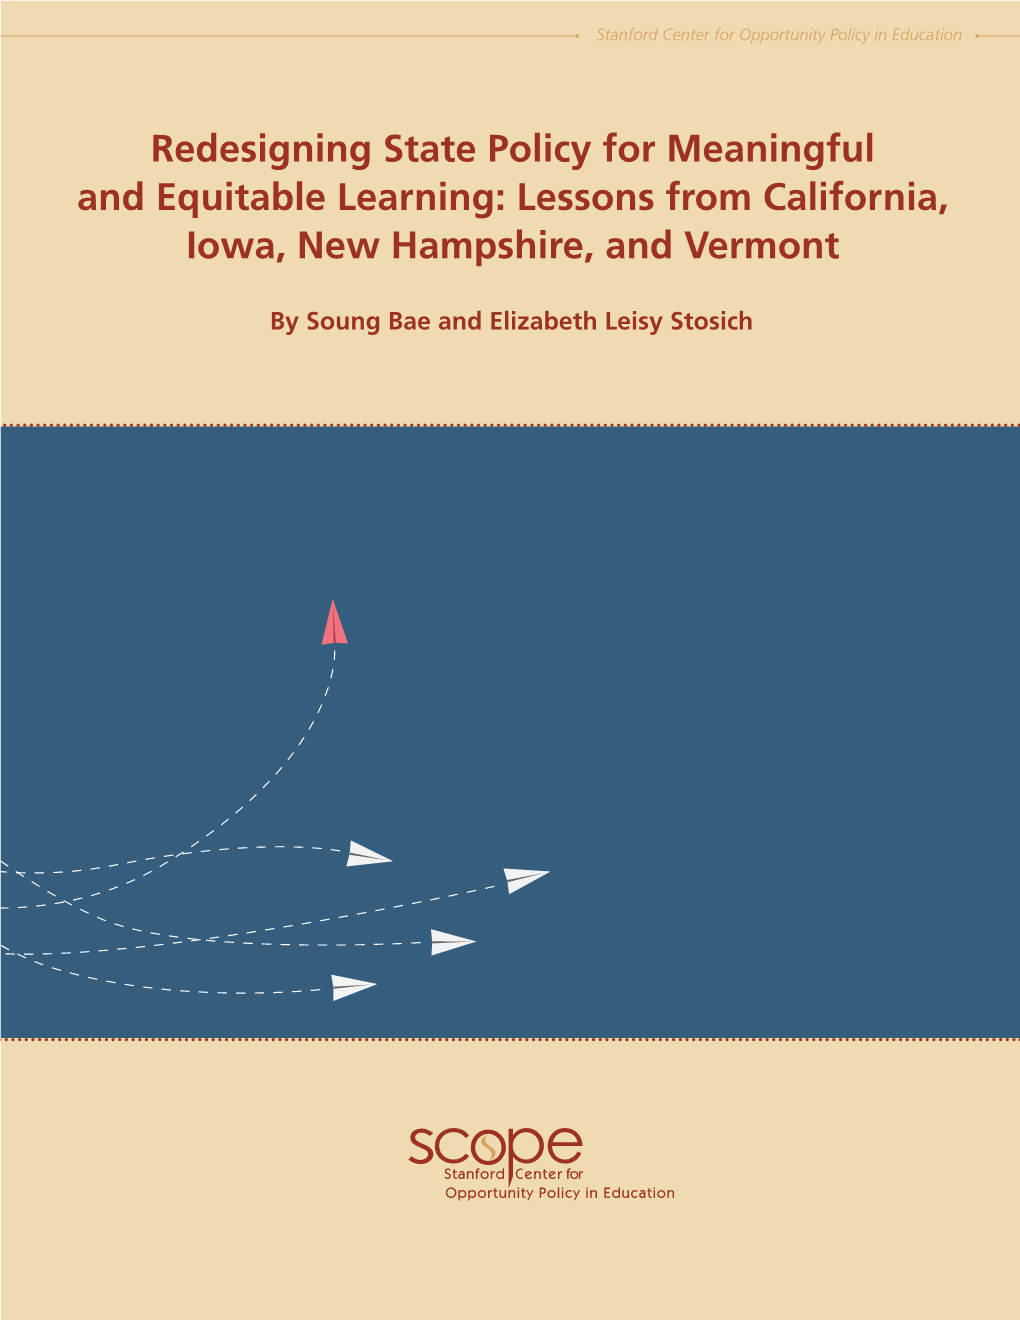 Redesigning State Policy for Meaningful and Equitable Learning: Lessons from California, Iowa, New Hampshire, and Vermont